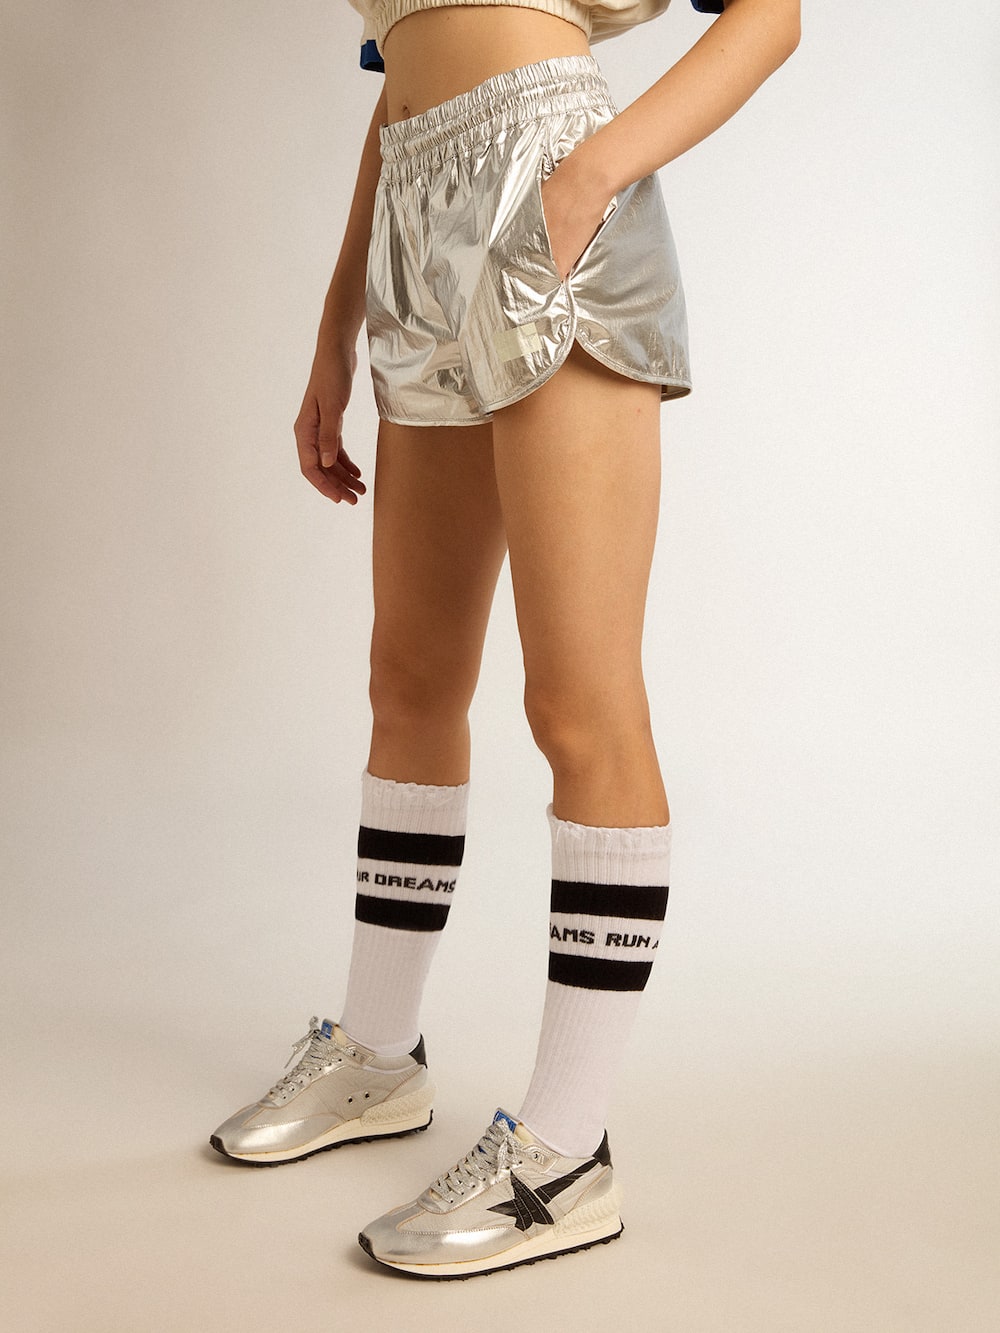 Golden Goose - Women’s running shorts in silver fabric in 